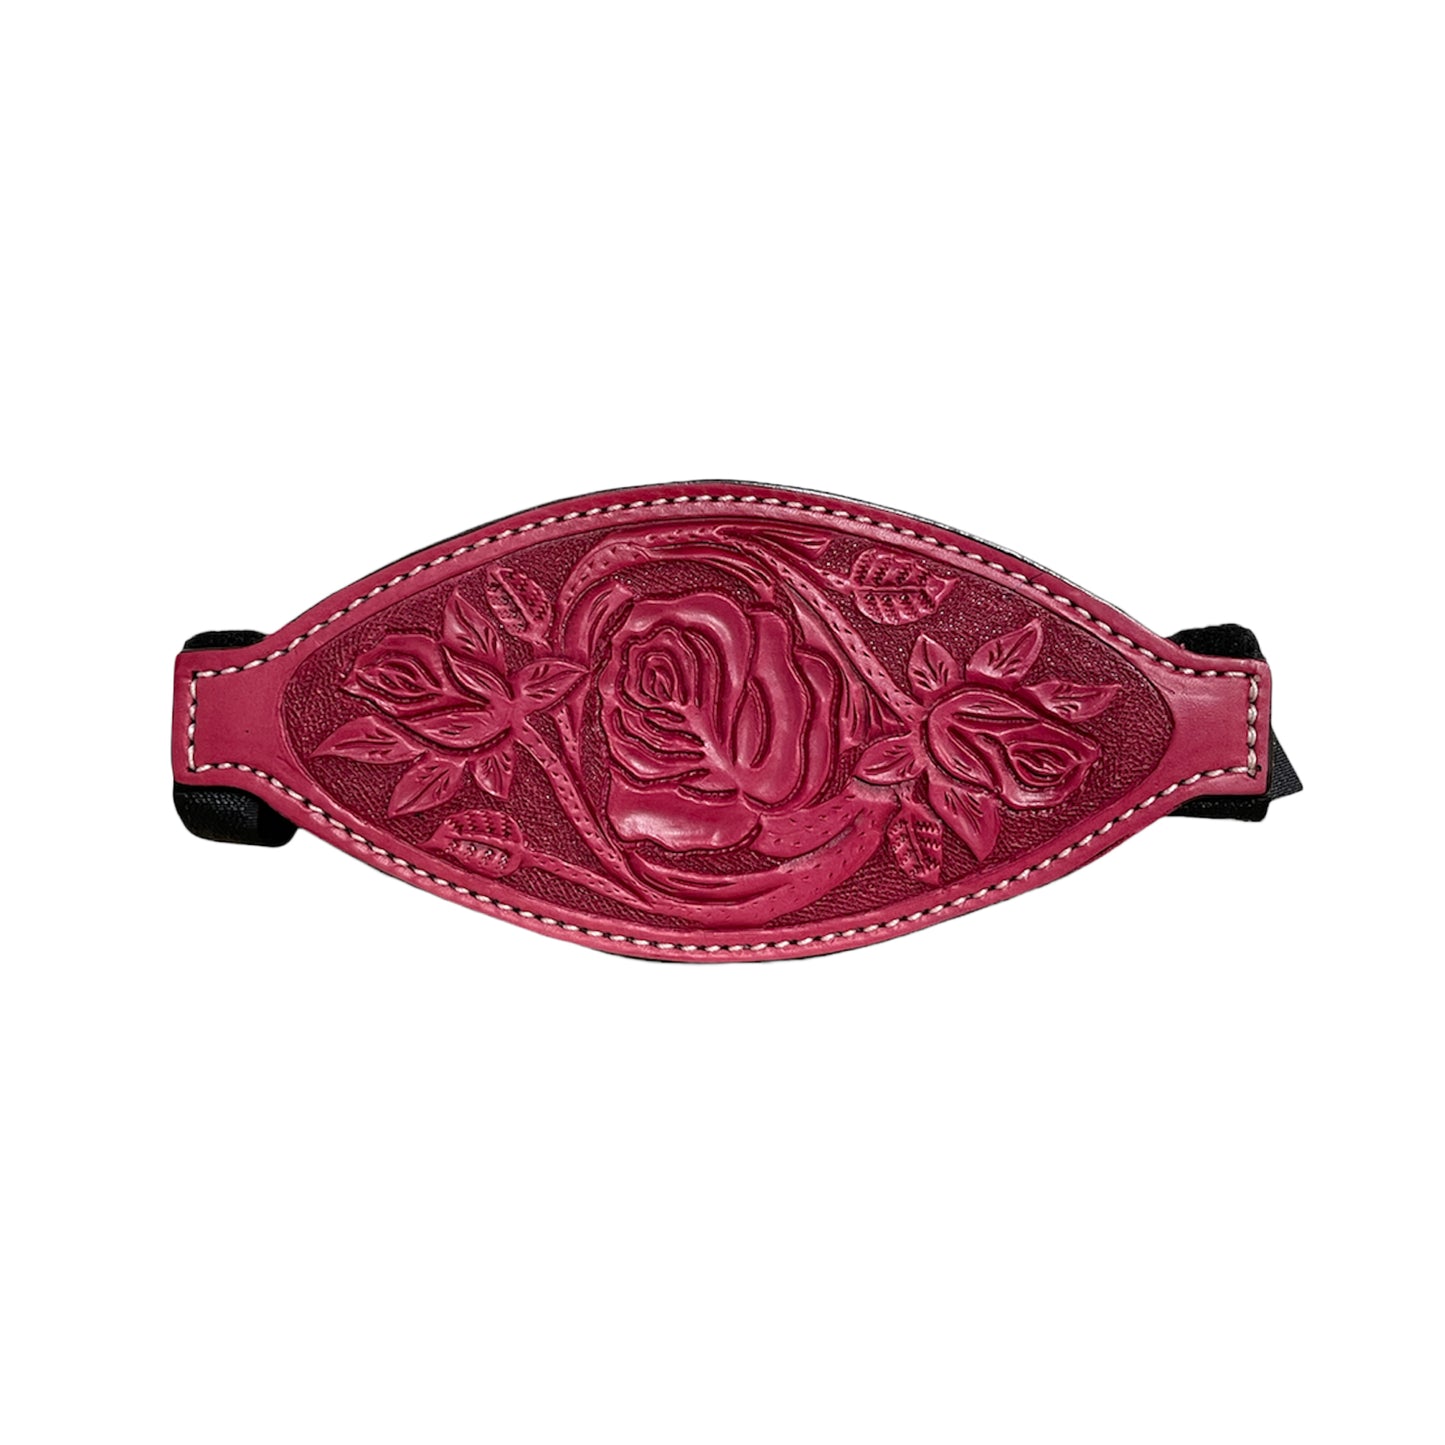 4310-RP Bronc nose dirty pink leather rose tooling